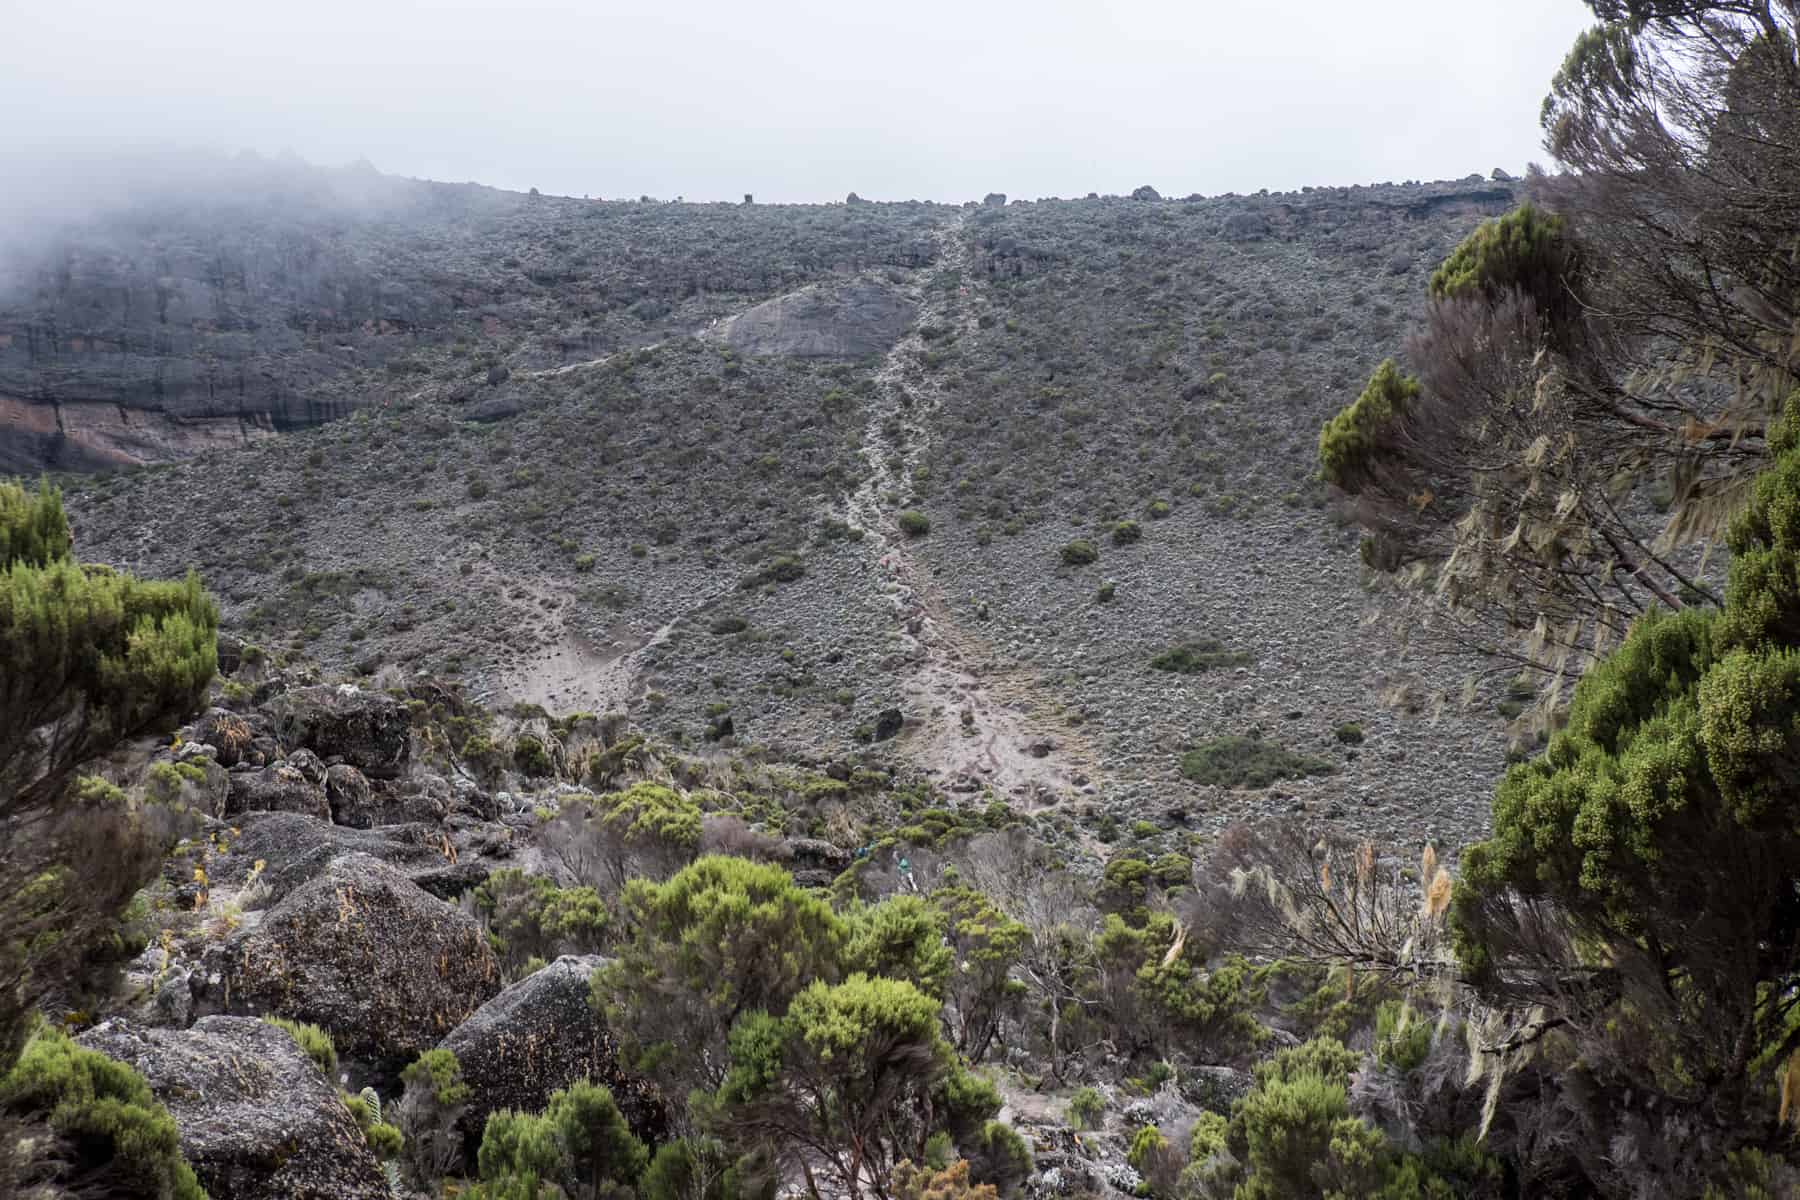 Beyond the think vegetation, a beige worn path lightly snakes up a very steep grey-green rock face on Mt. Kilimanjaro.